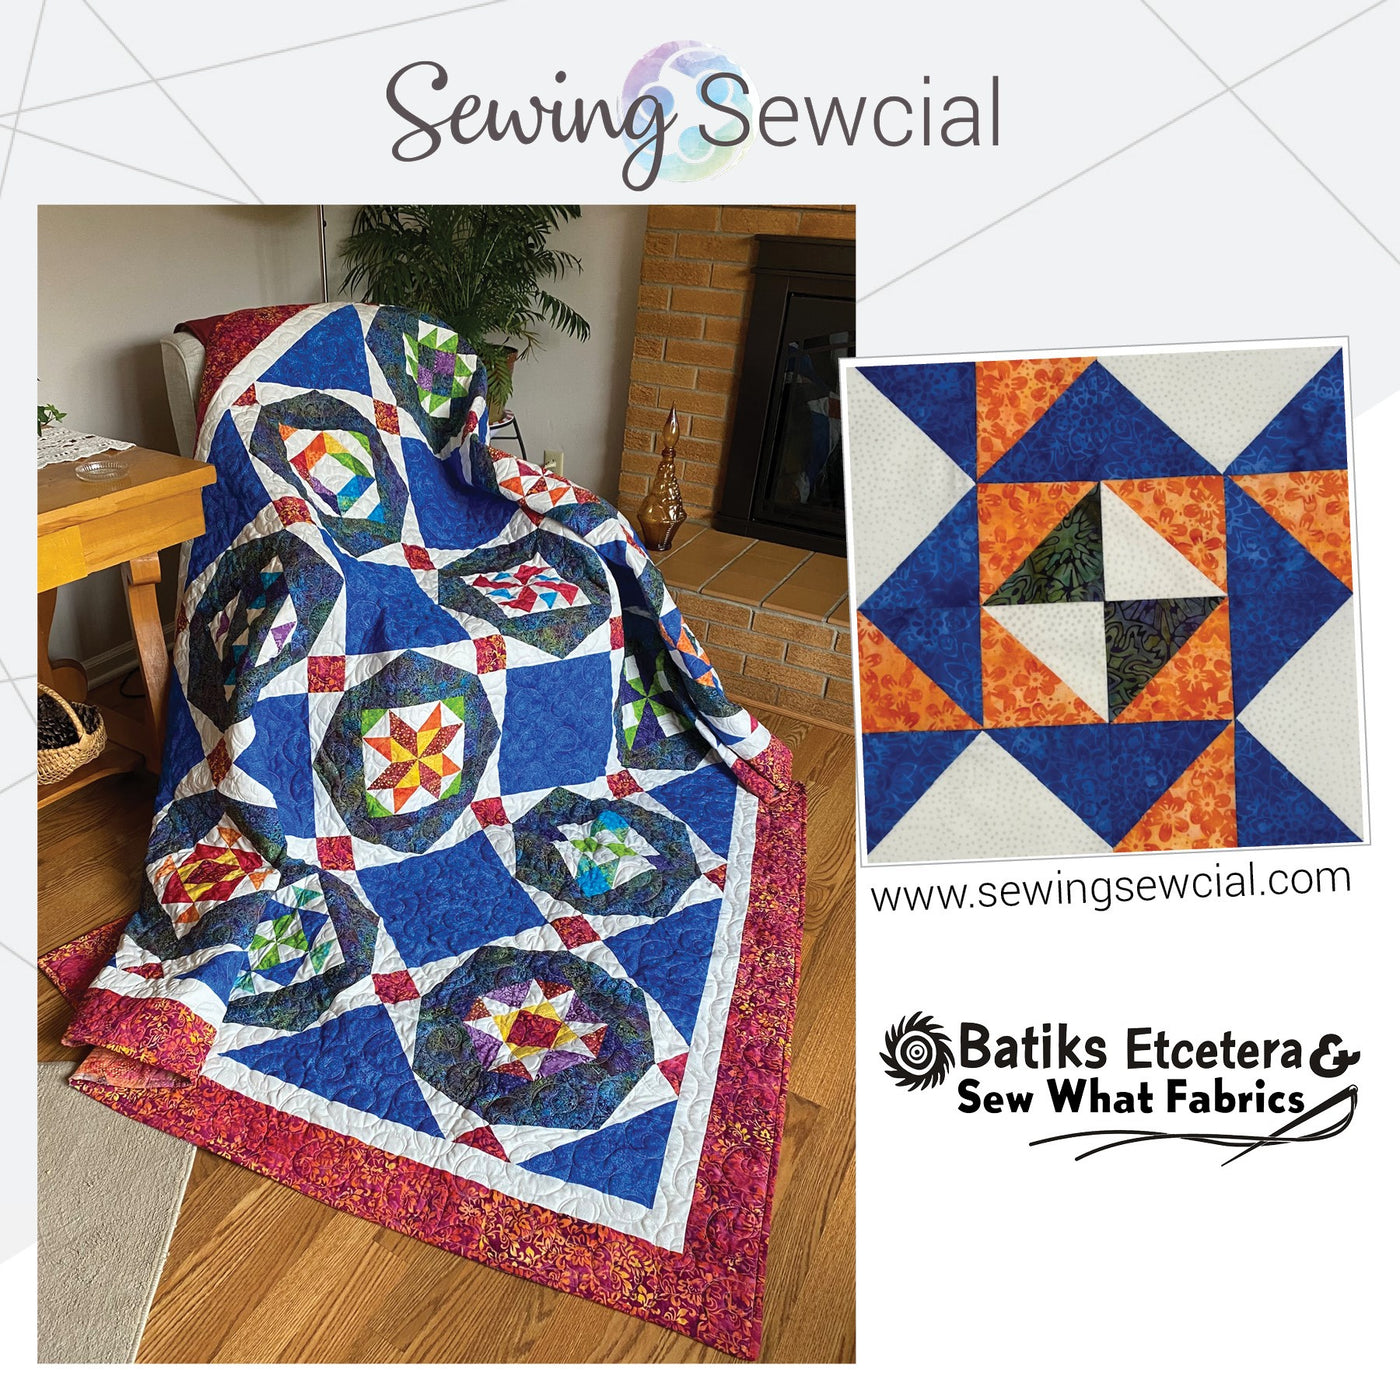 Sewing Sewcial